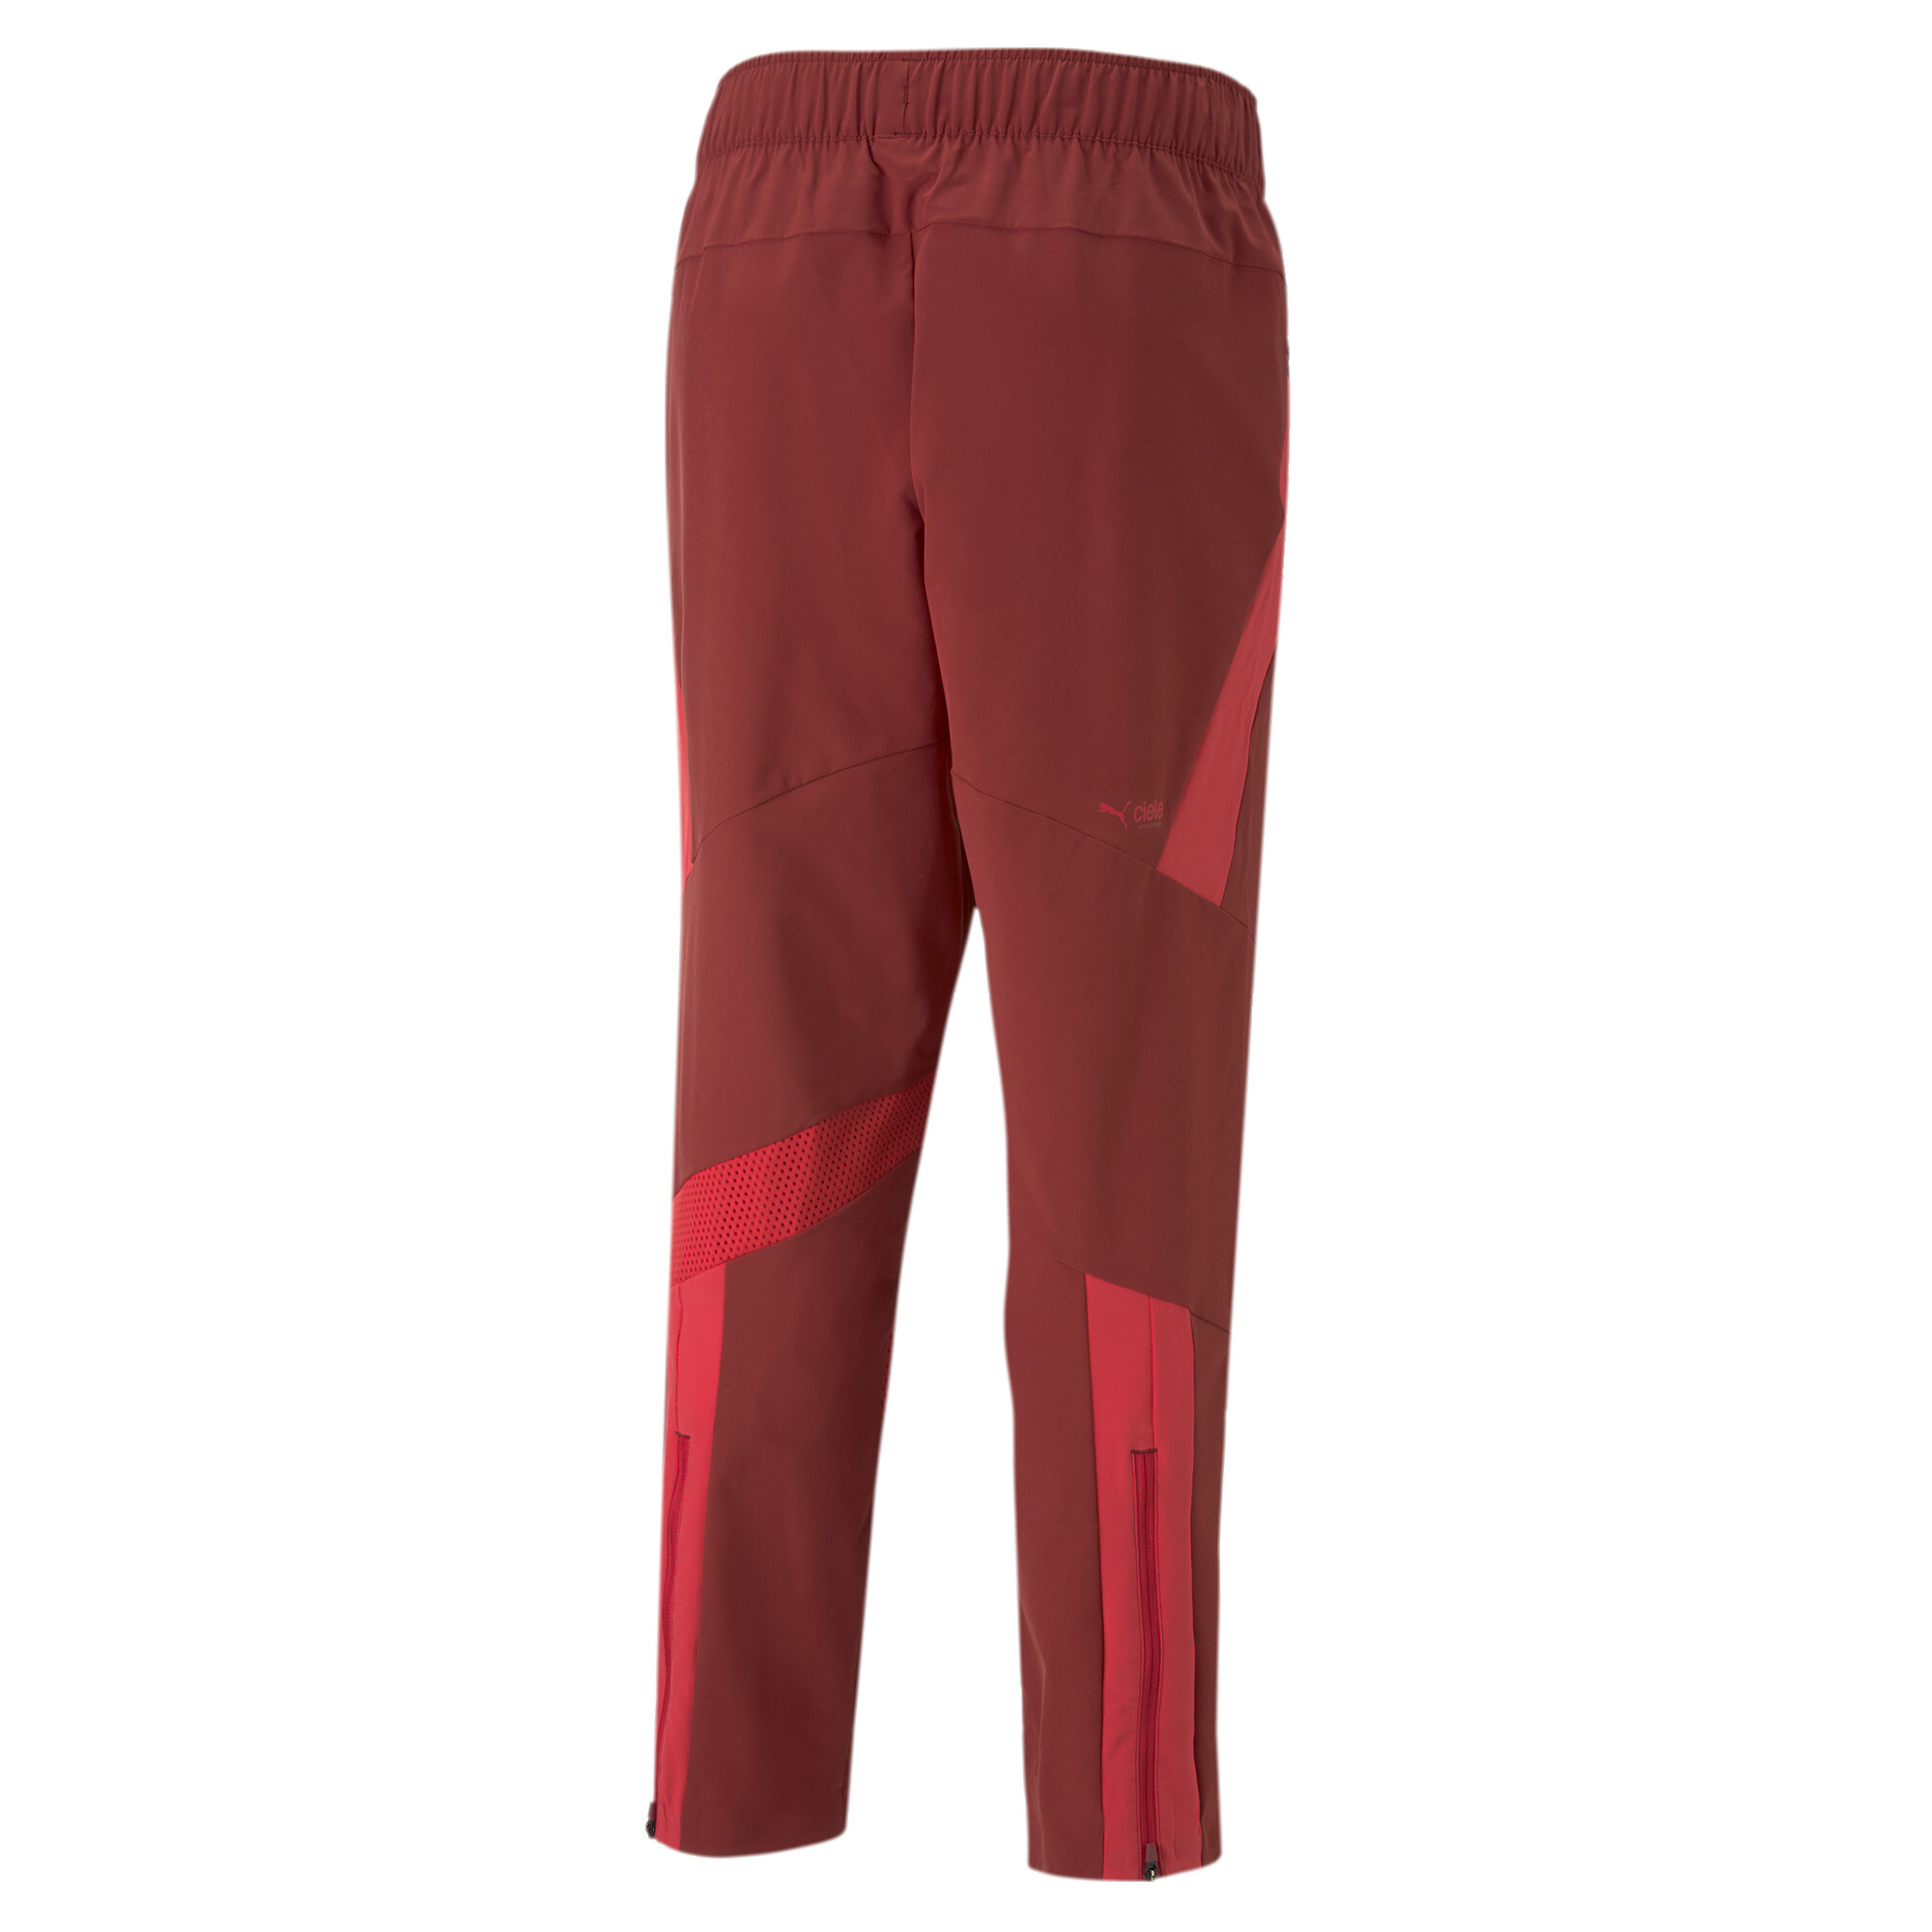 Men's PUMA X CIELE Running Tracksuit Pants In Red, Size Small